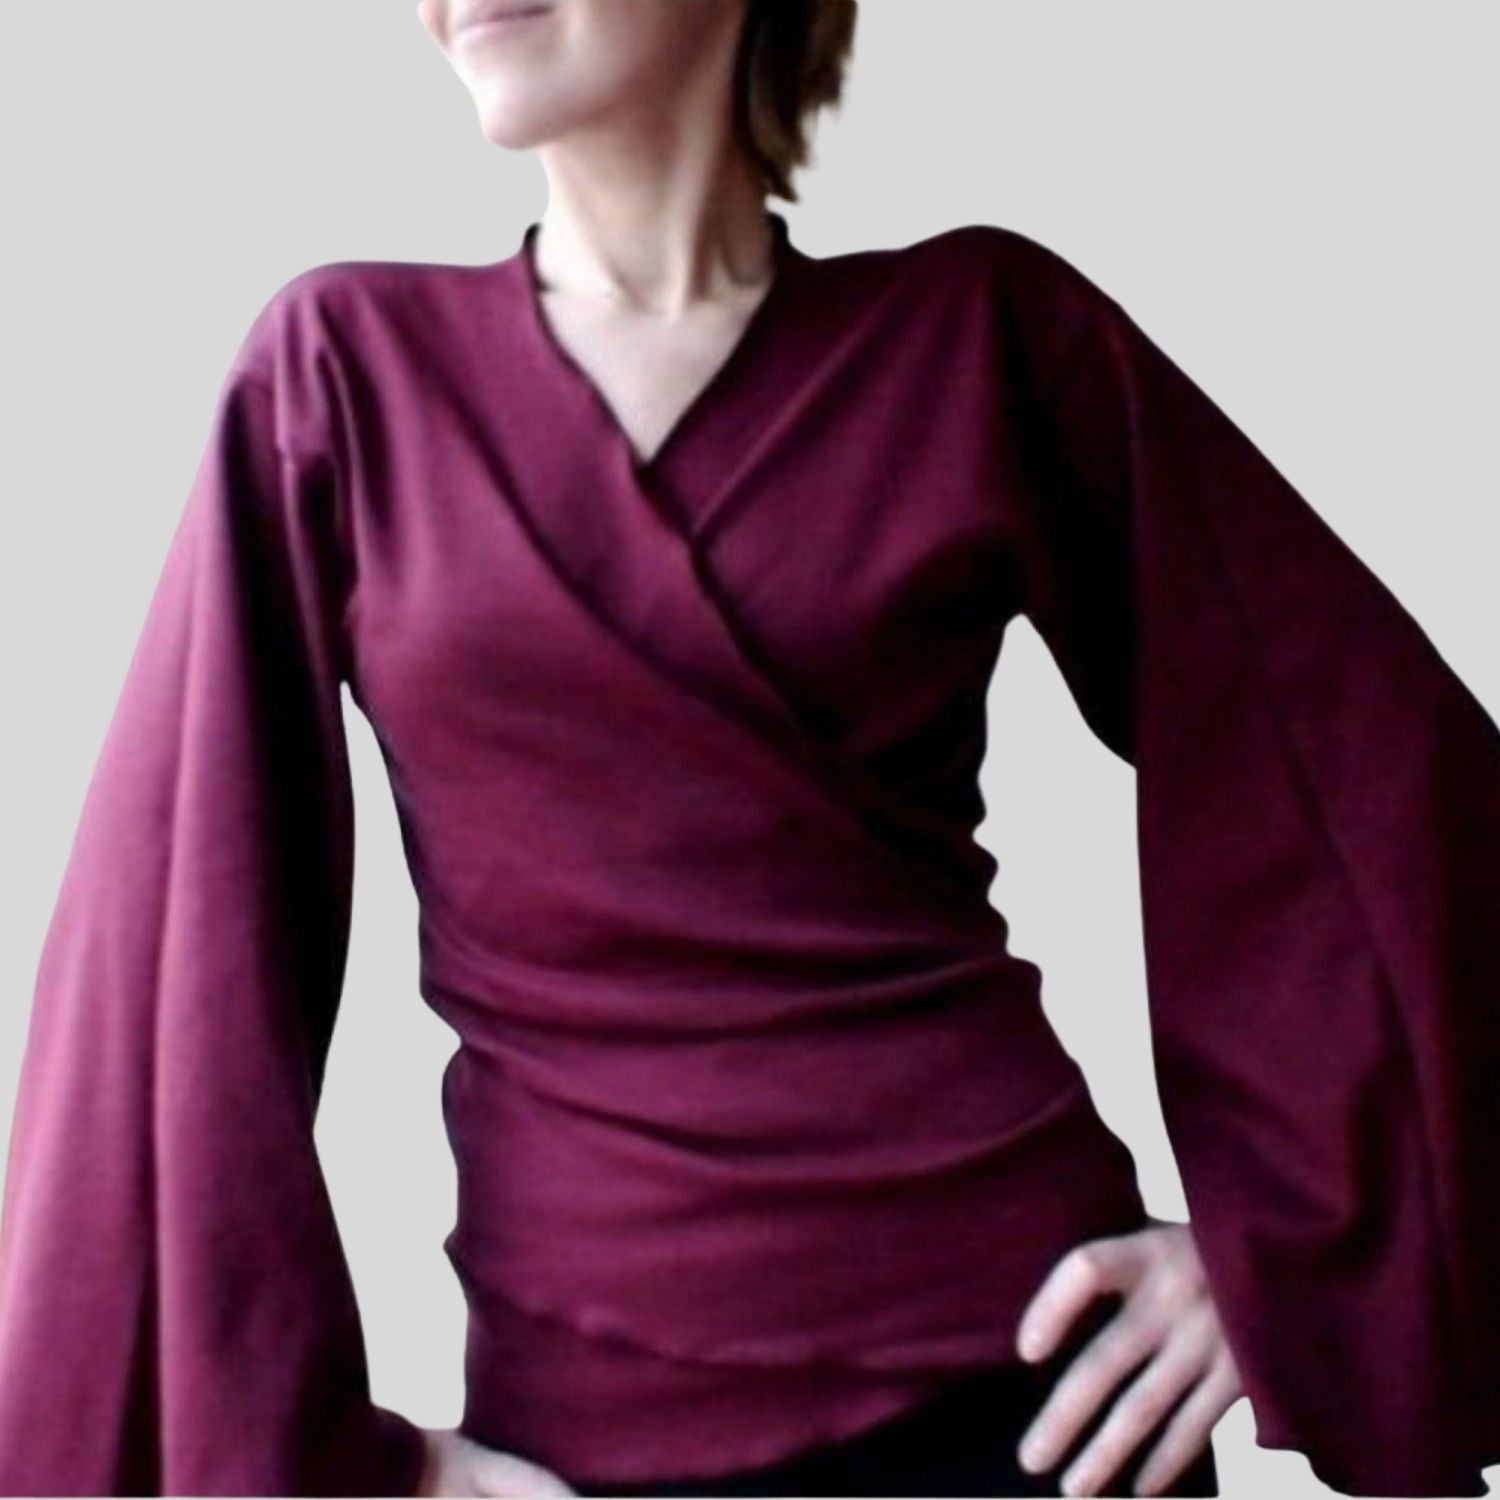 Wine red Shop made in Canada kimono wrap tops | Best kimono sleeve wrap shirts for women | Organic cotton clothing shop Econica